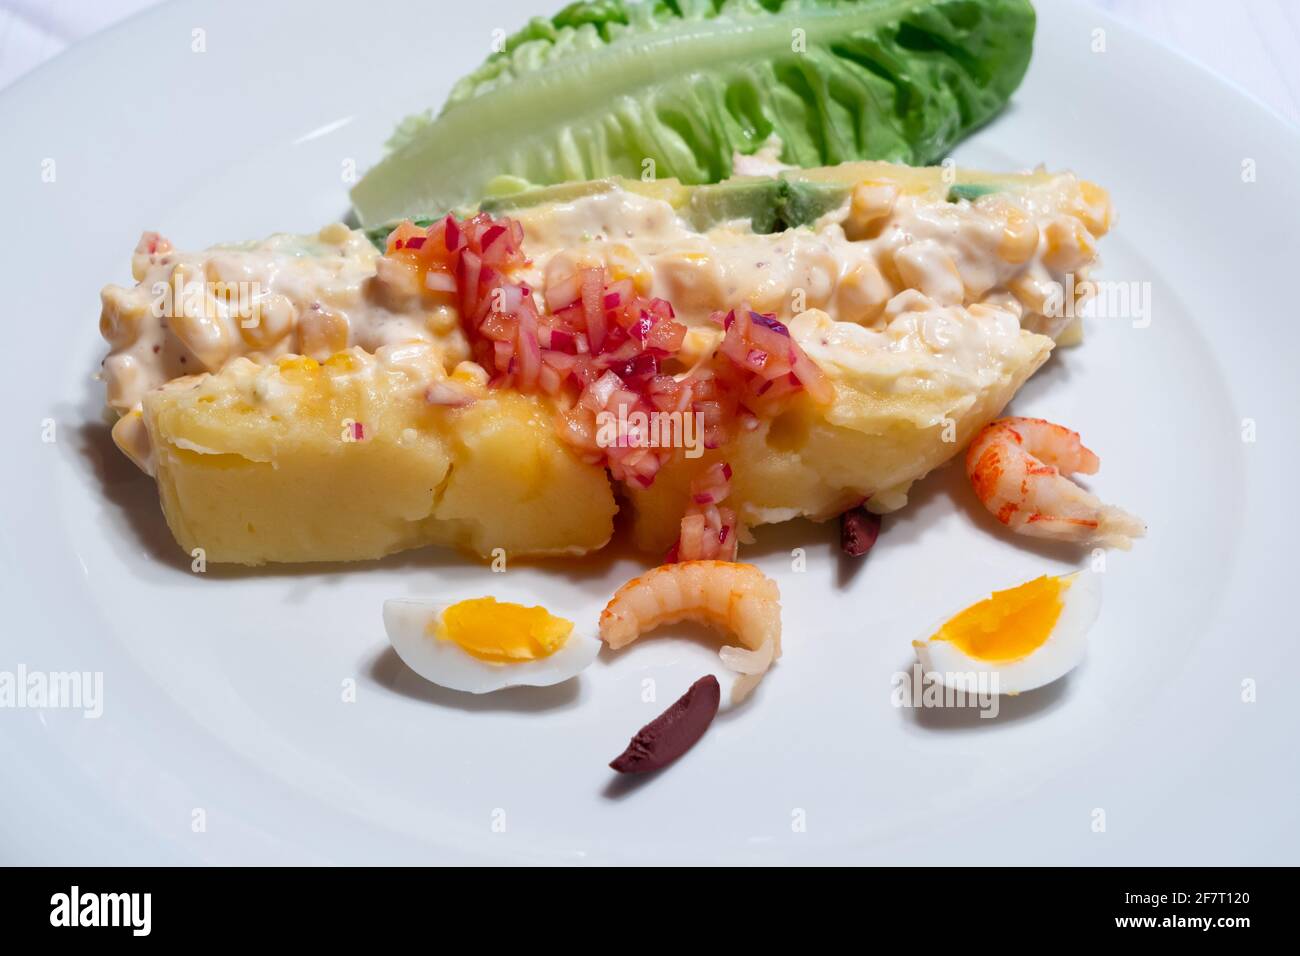 Causa Limena, a Typical Dish in Peruvian Cuisine Served with Onions, Crayfish and Quail Eggs Stock Photo